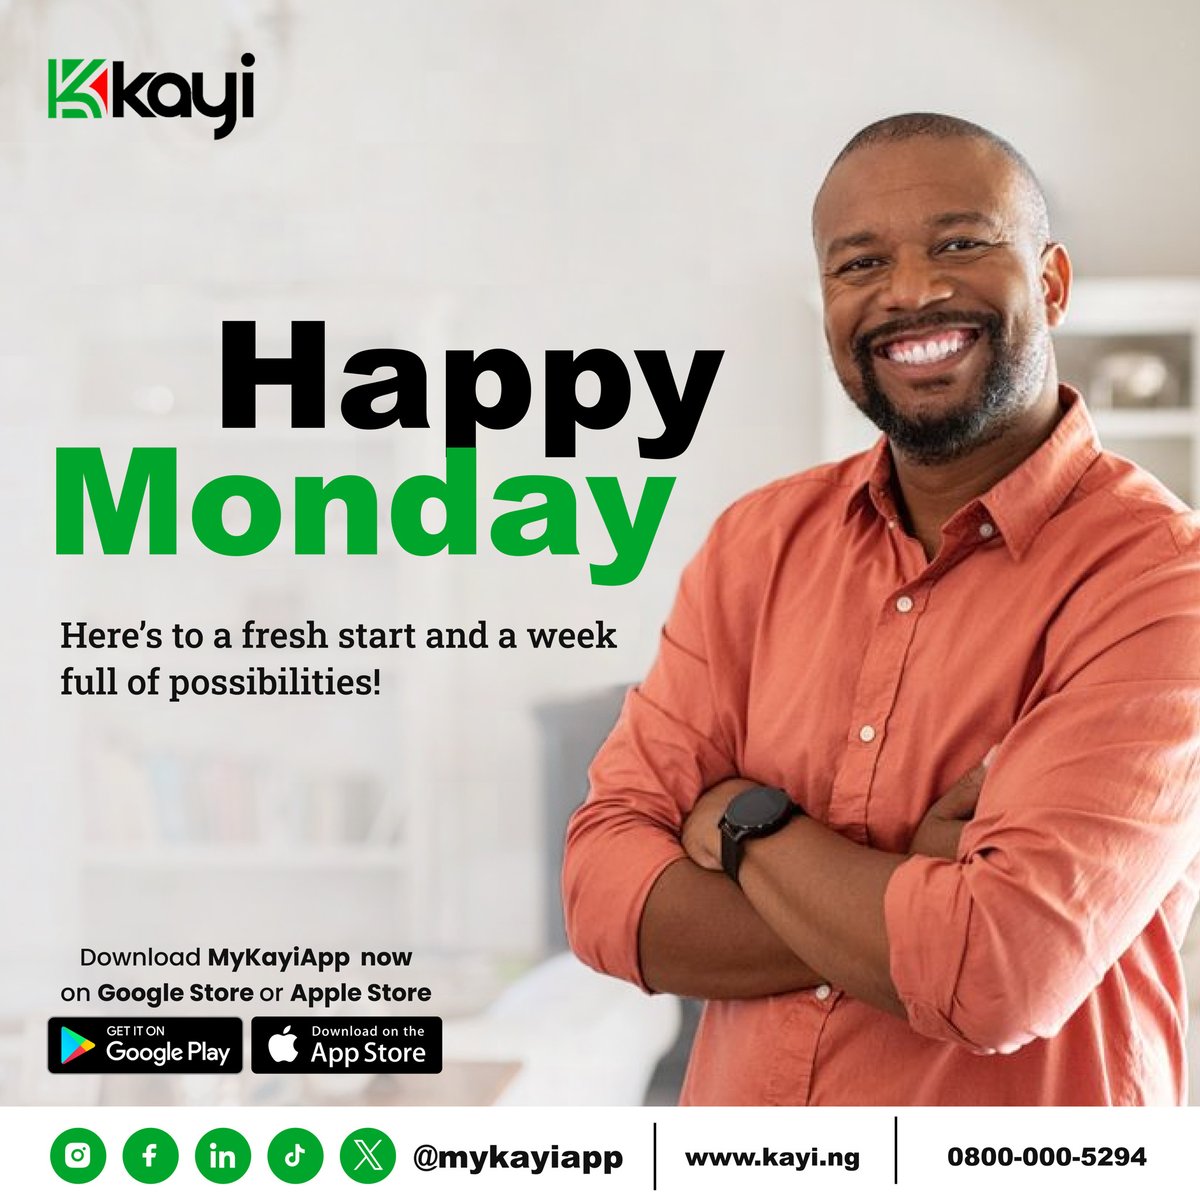 Happy Monday! Here's to a fresh start and a week full of possibilities. You've got this!

#HappyMonday
#MondayMotivation
#MyKayiapp
#Kayiway
#Digitalbanking